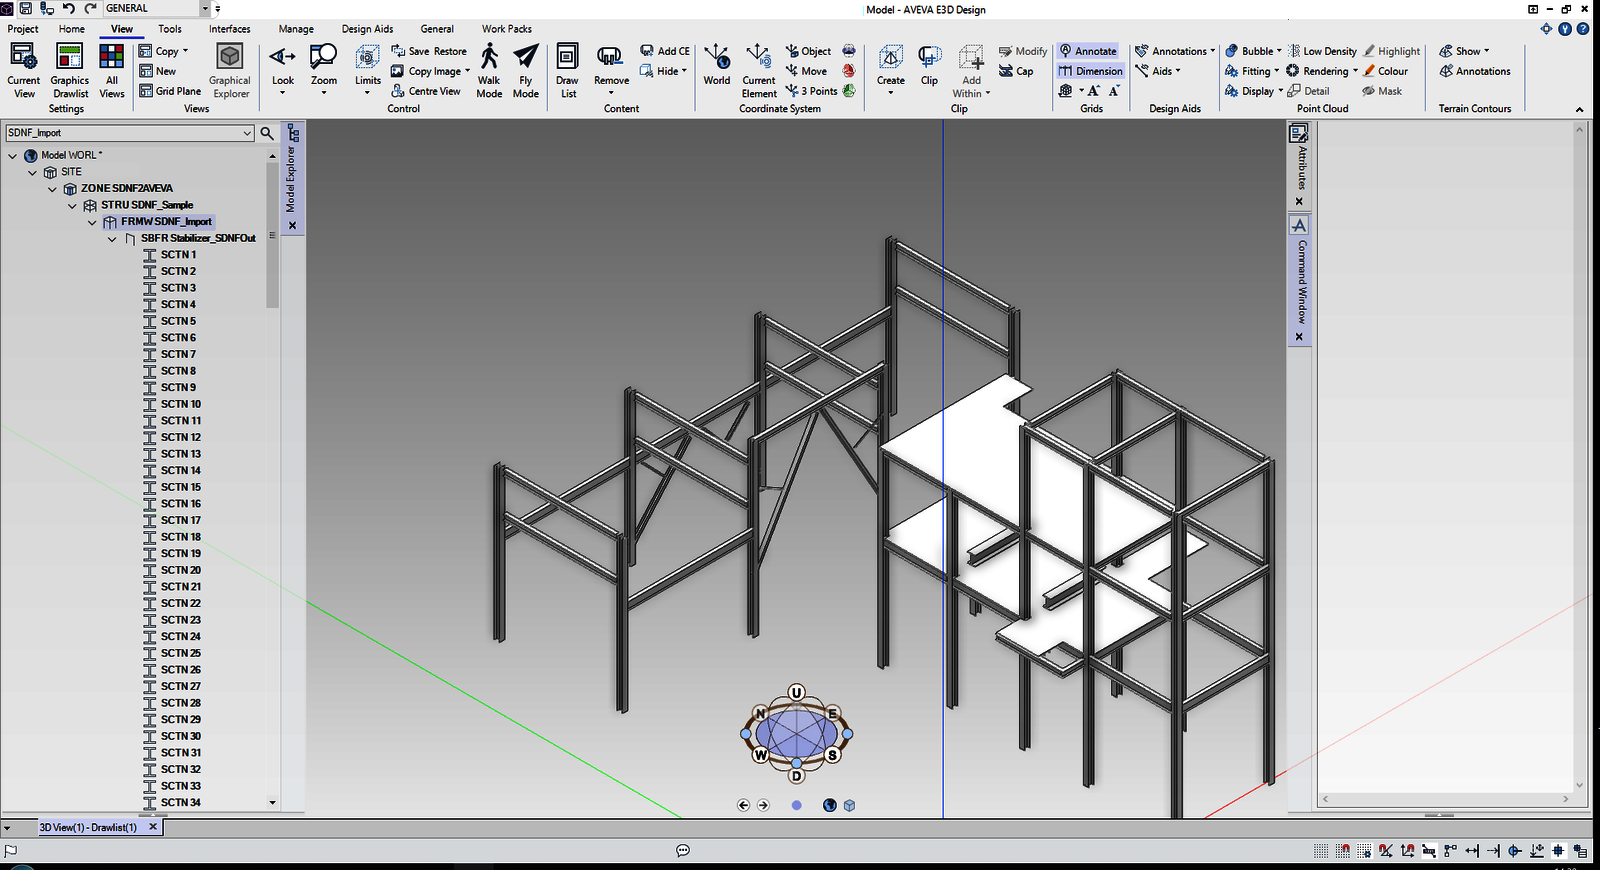 Structural Steel Model converted into intelligent AVEVA E3D Plant Steel components